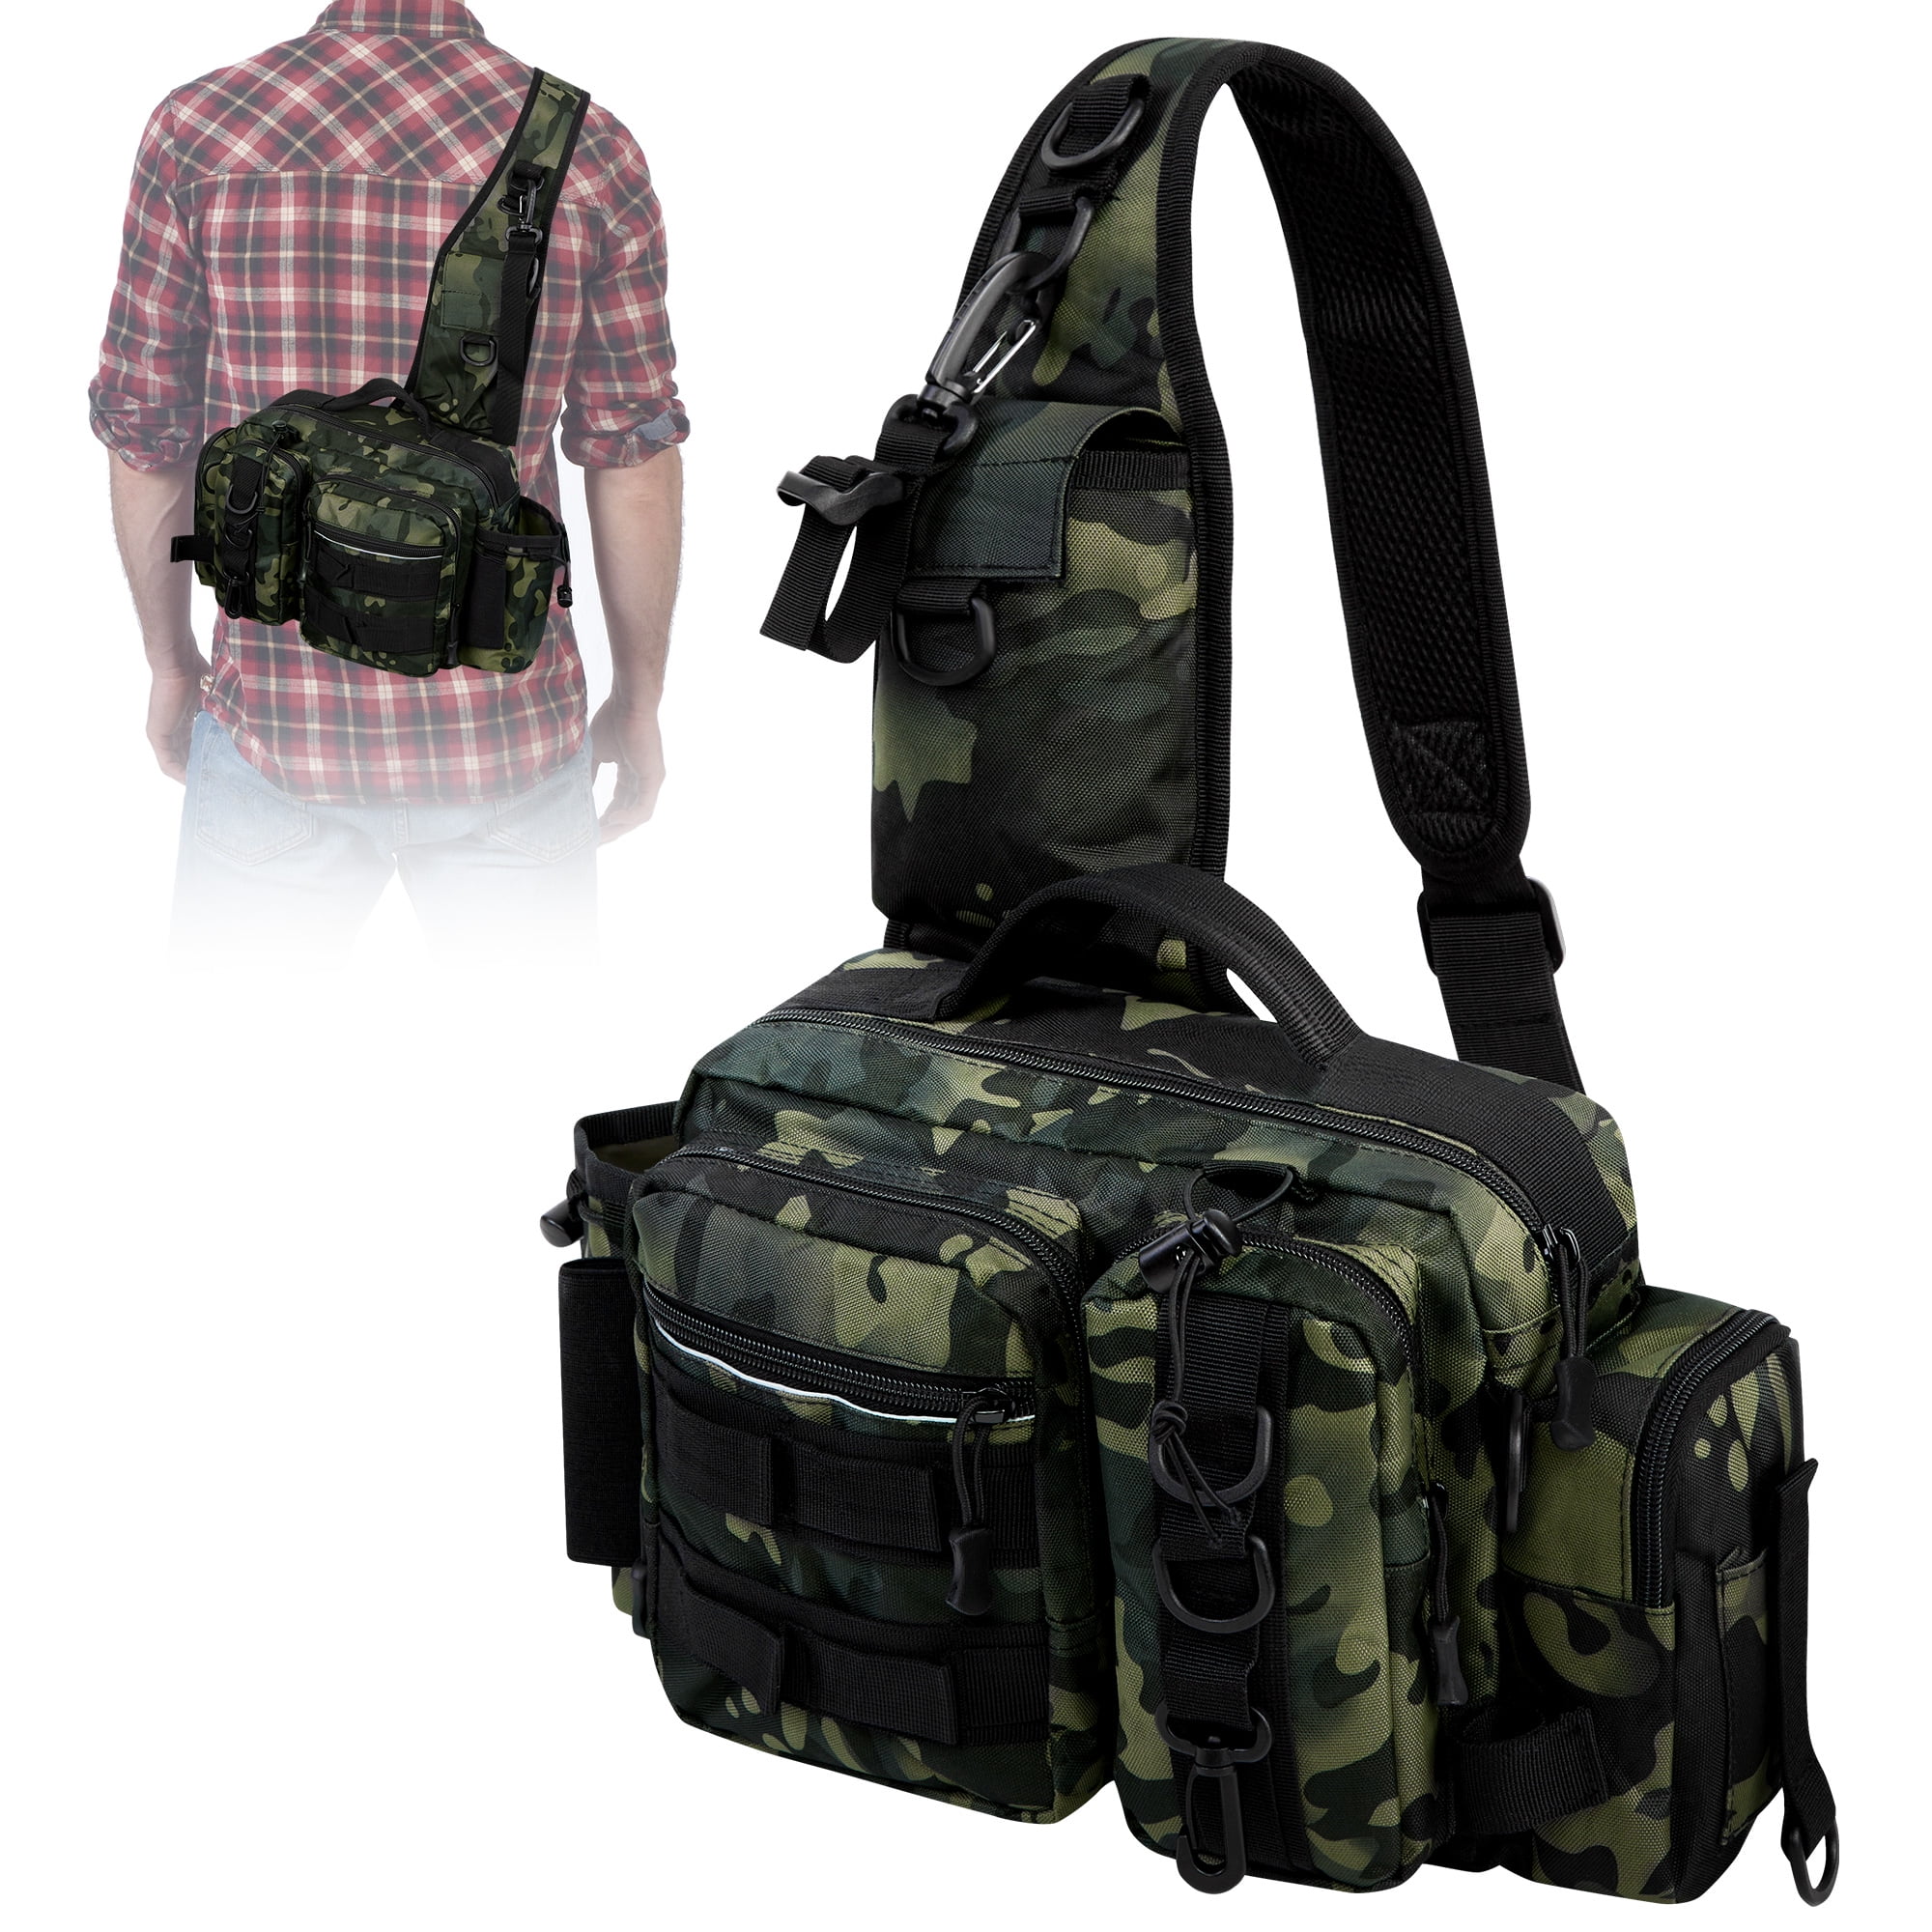 Fishing Backpack Tackle Sling Bag - Fishing Backpack with Rod